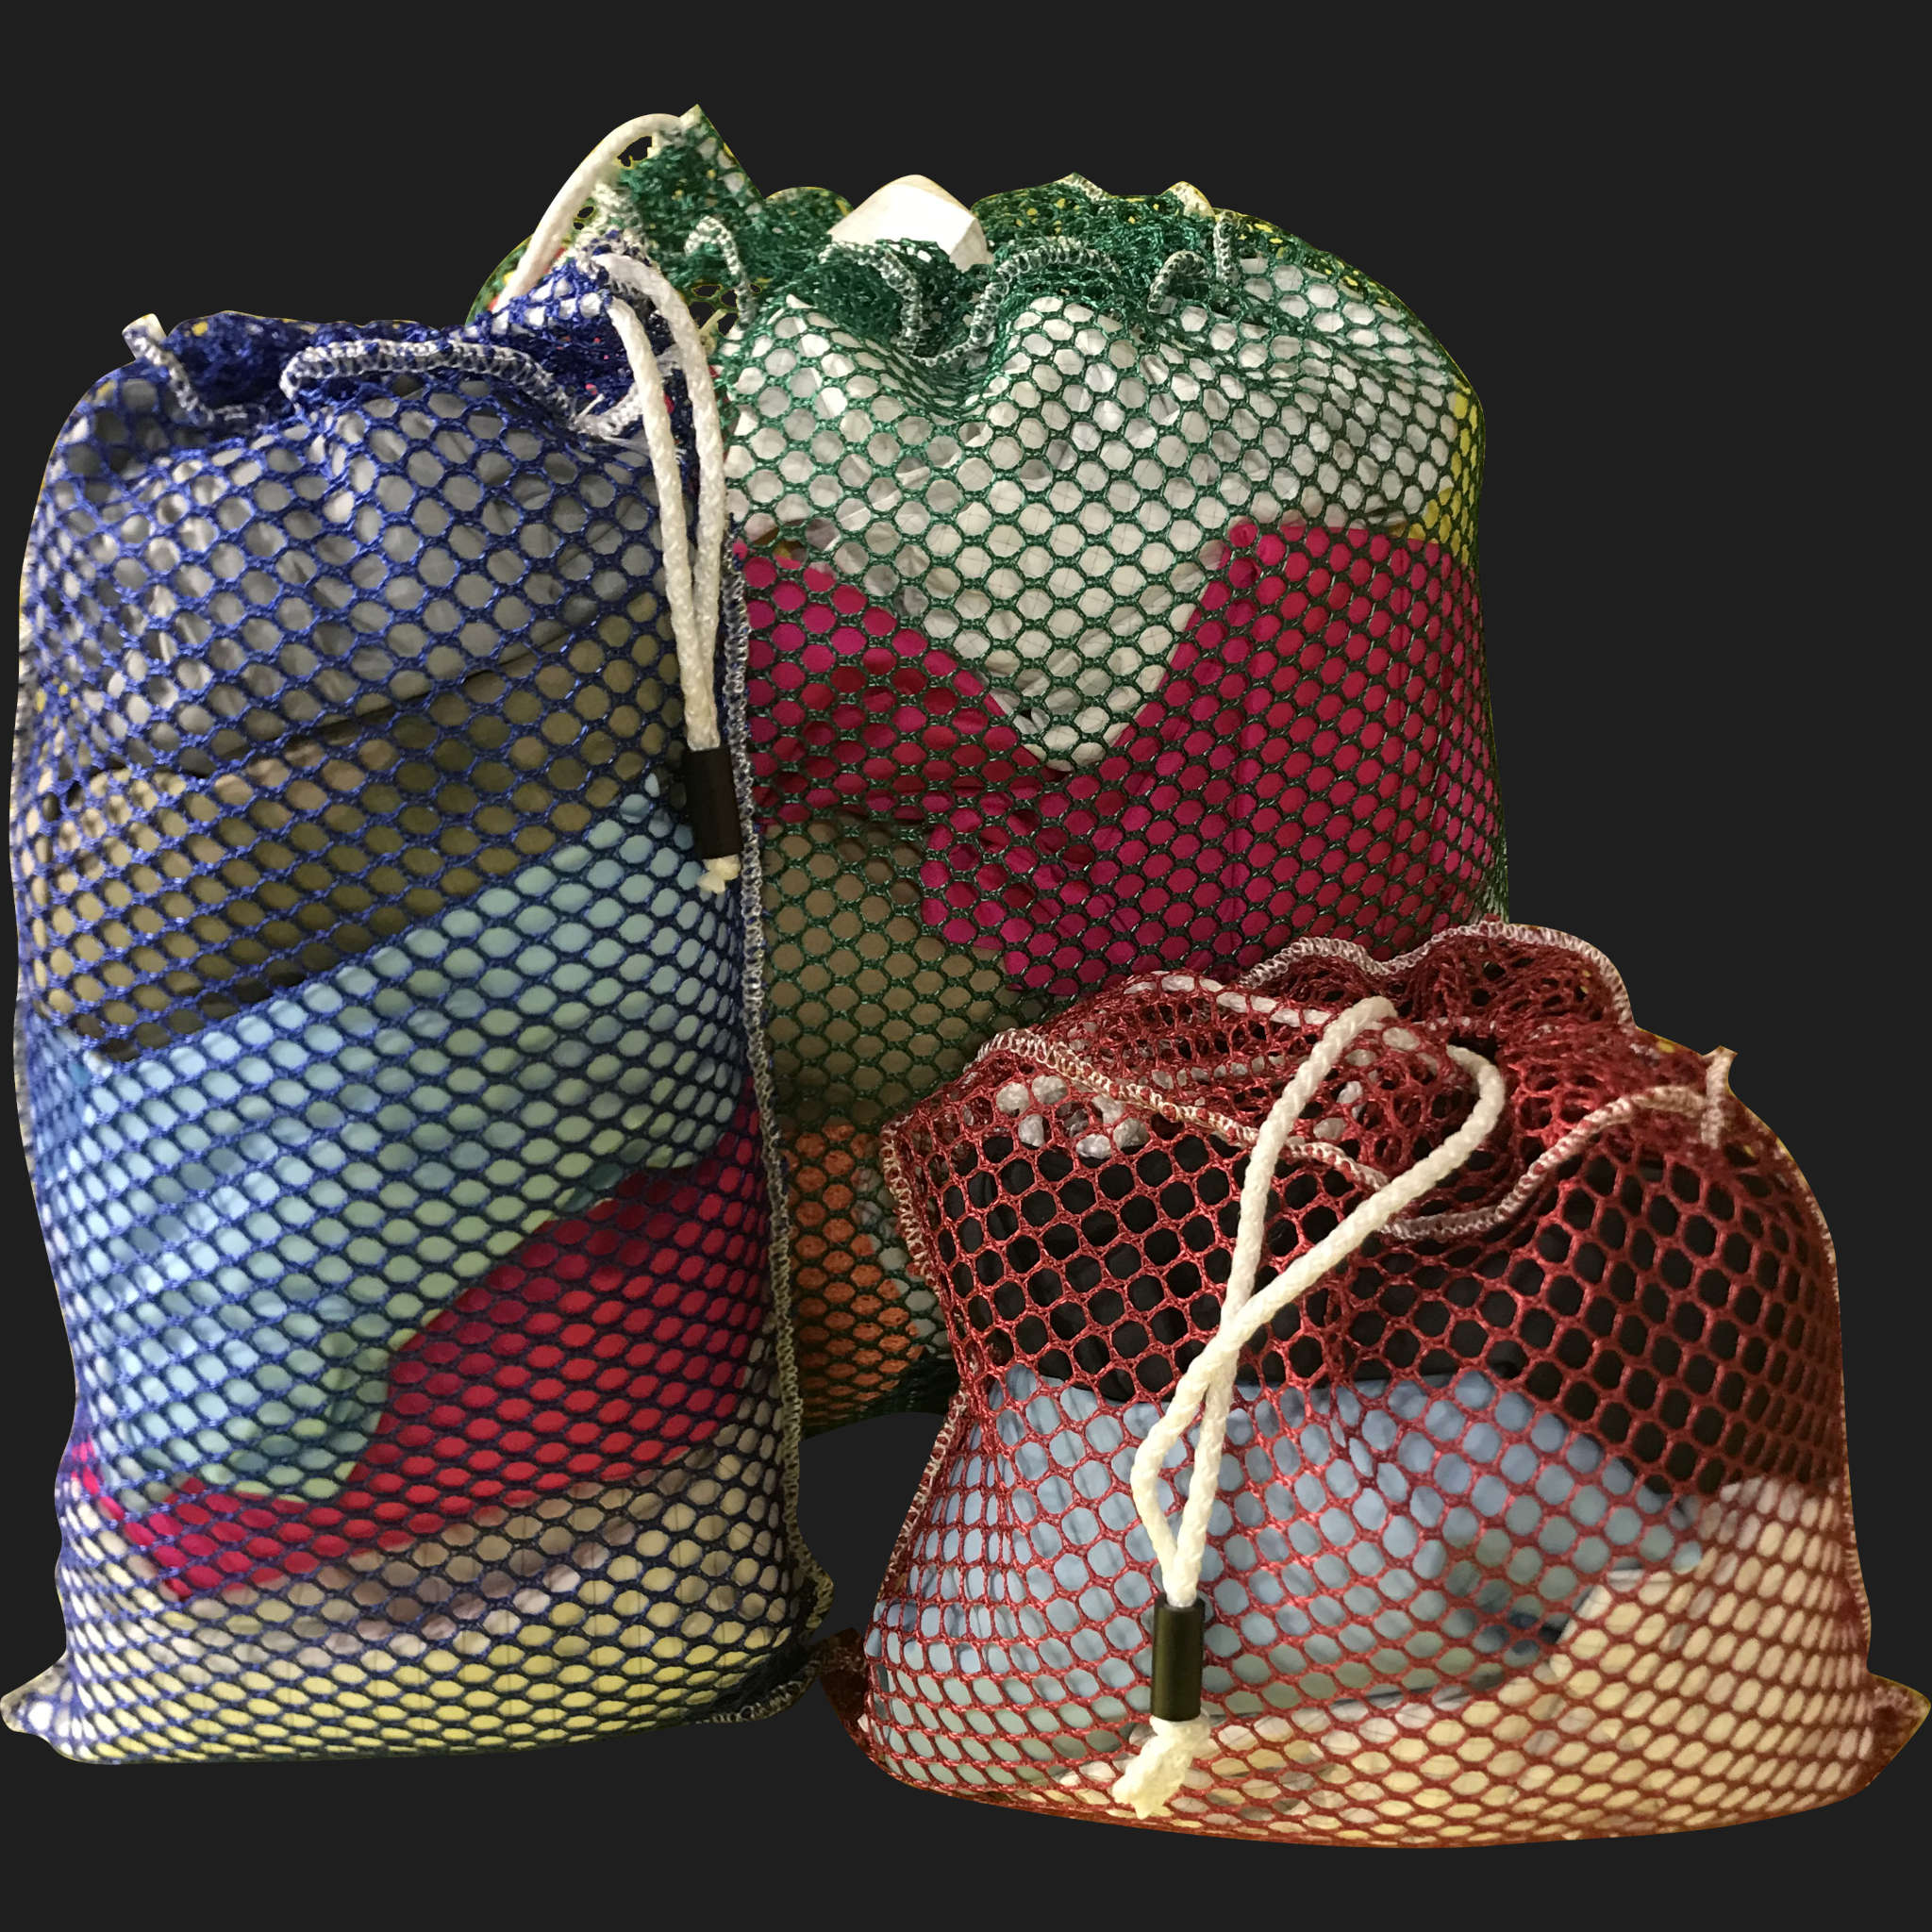 20" x 42" Customized Mesh-Net-Laundry Bags Heavy Duty with Cord and barrellock closure